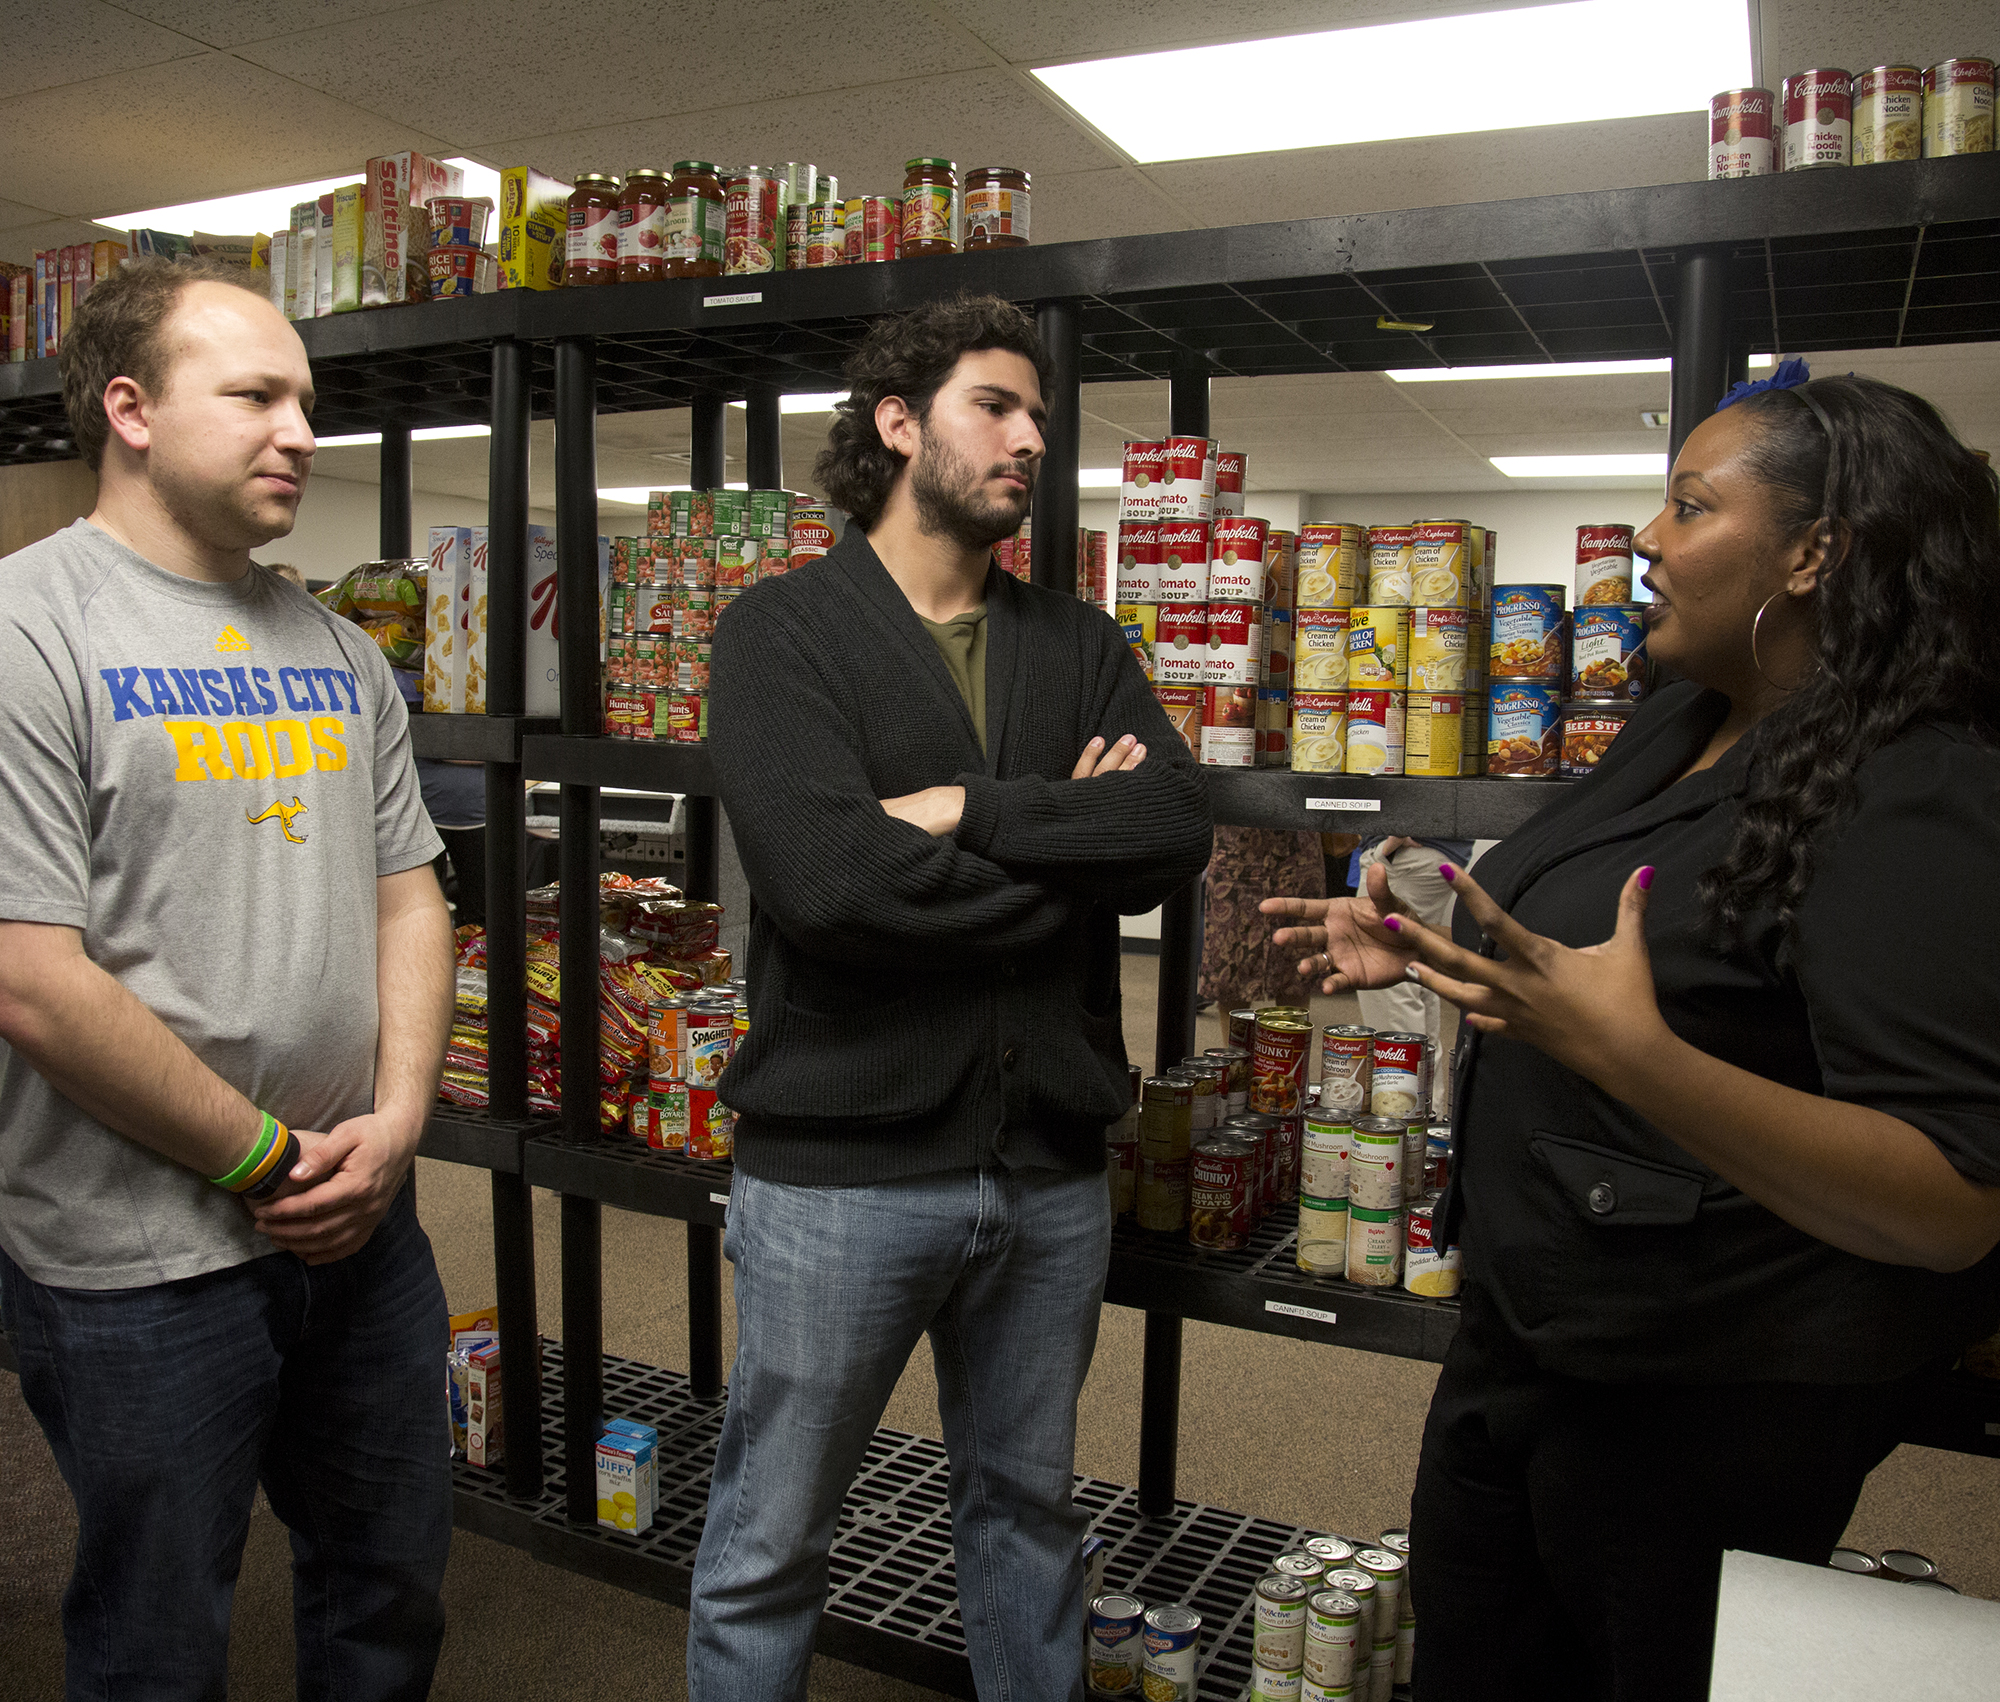 three people stand in front of shelves filled with canned and boxed goods at the Kangaroo Pantry